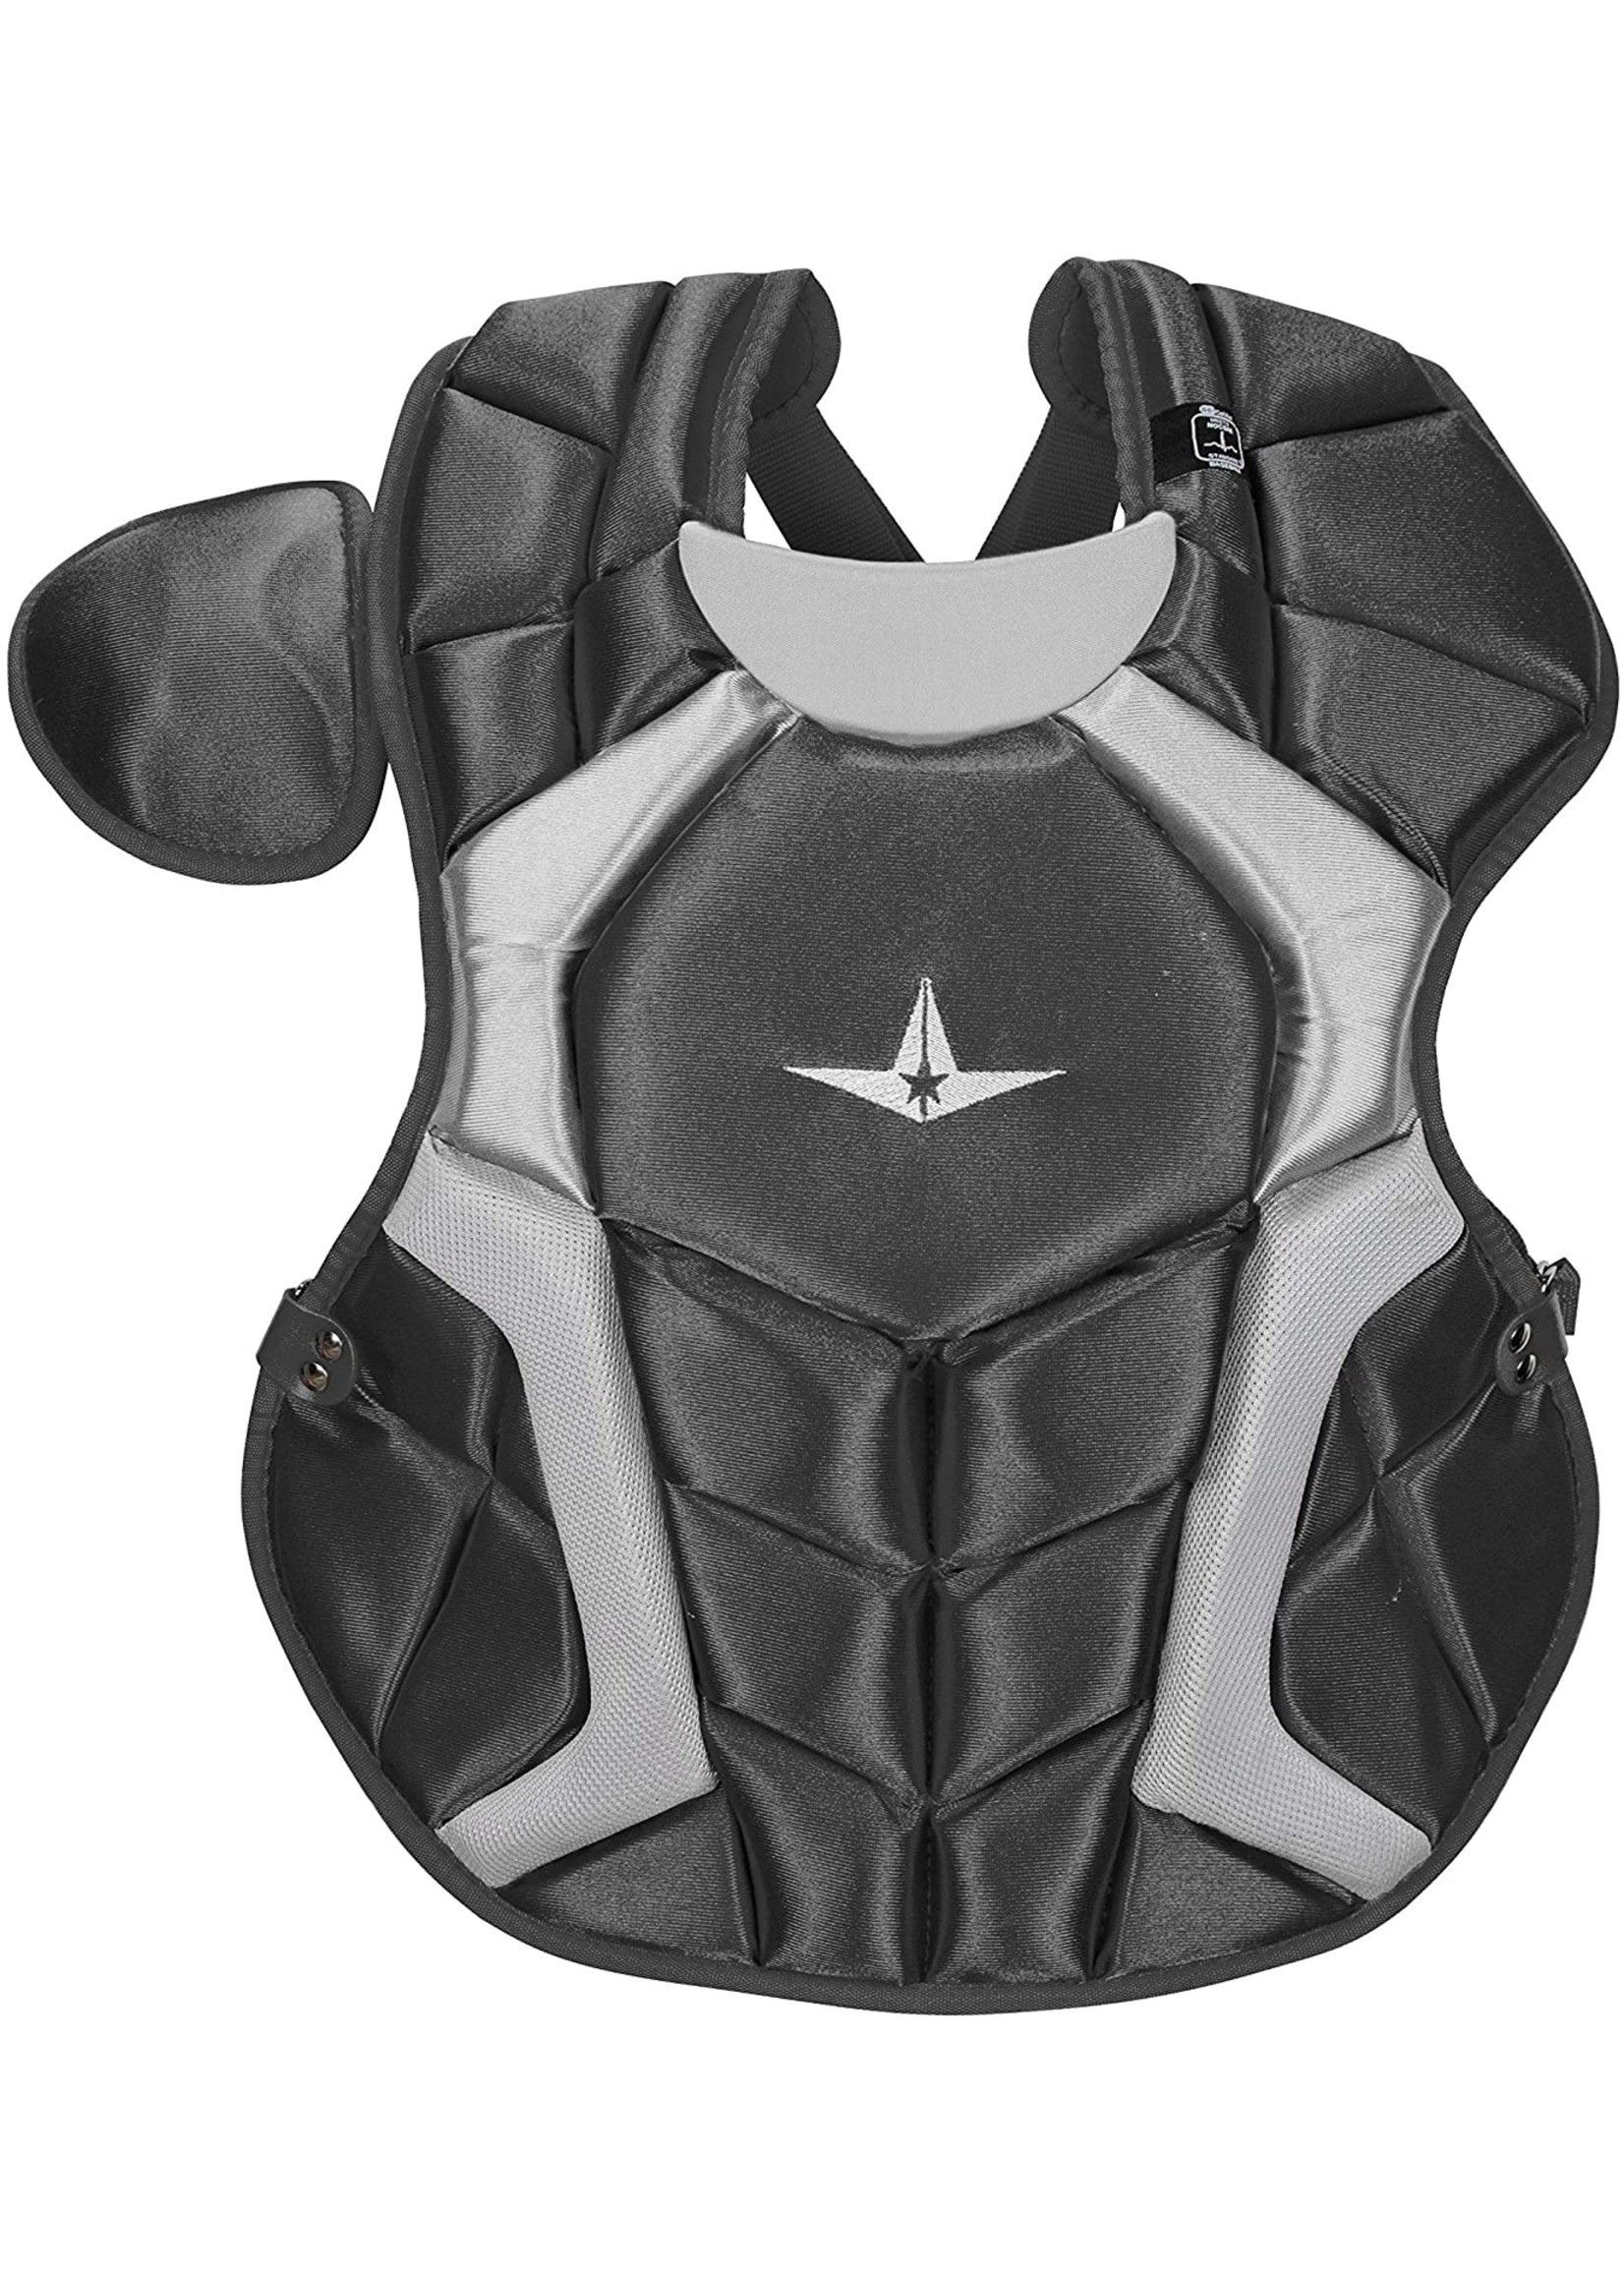 ALL STAR Players Series Chest Protector Yth (9-12) - 14.5"